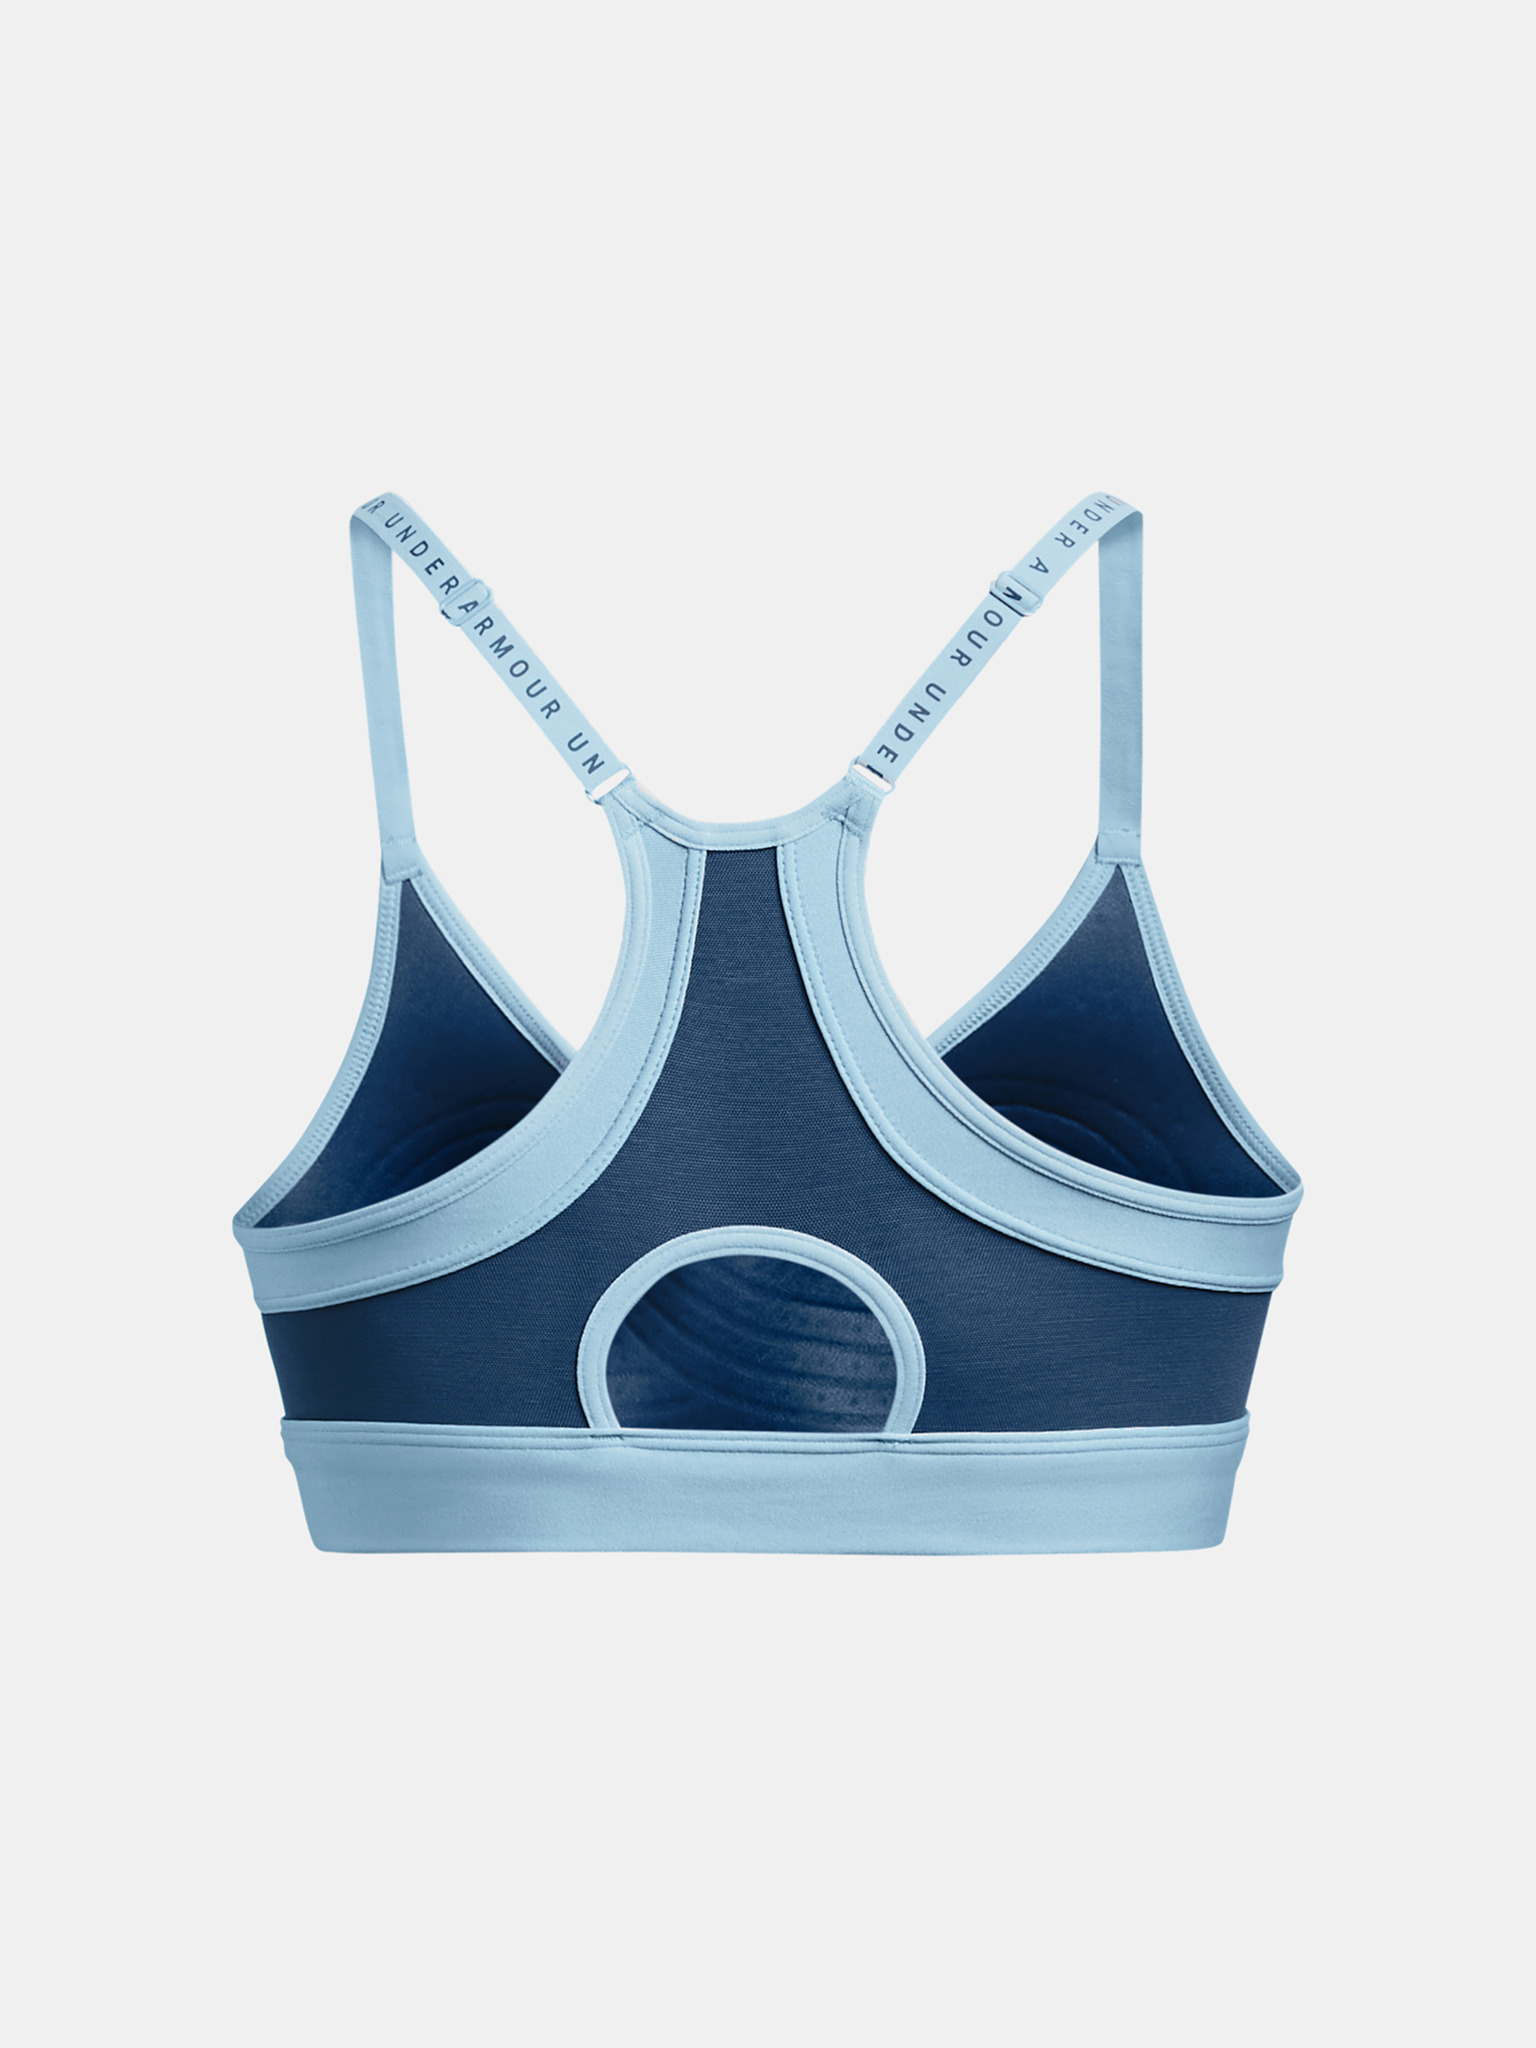 Under Armour Women's UA Infinity Low Covered Sports Bra - 1363354